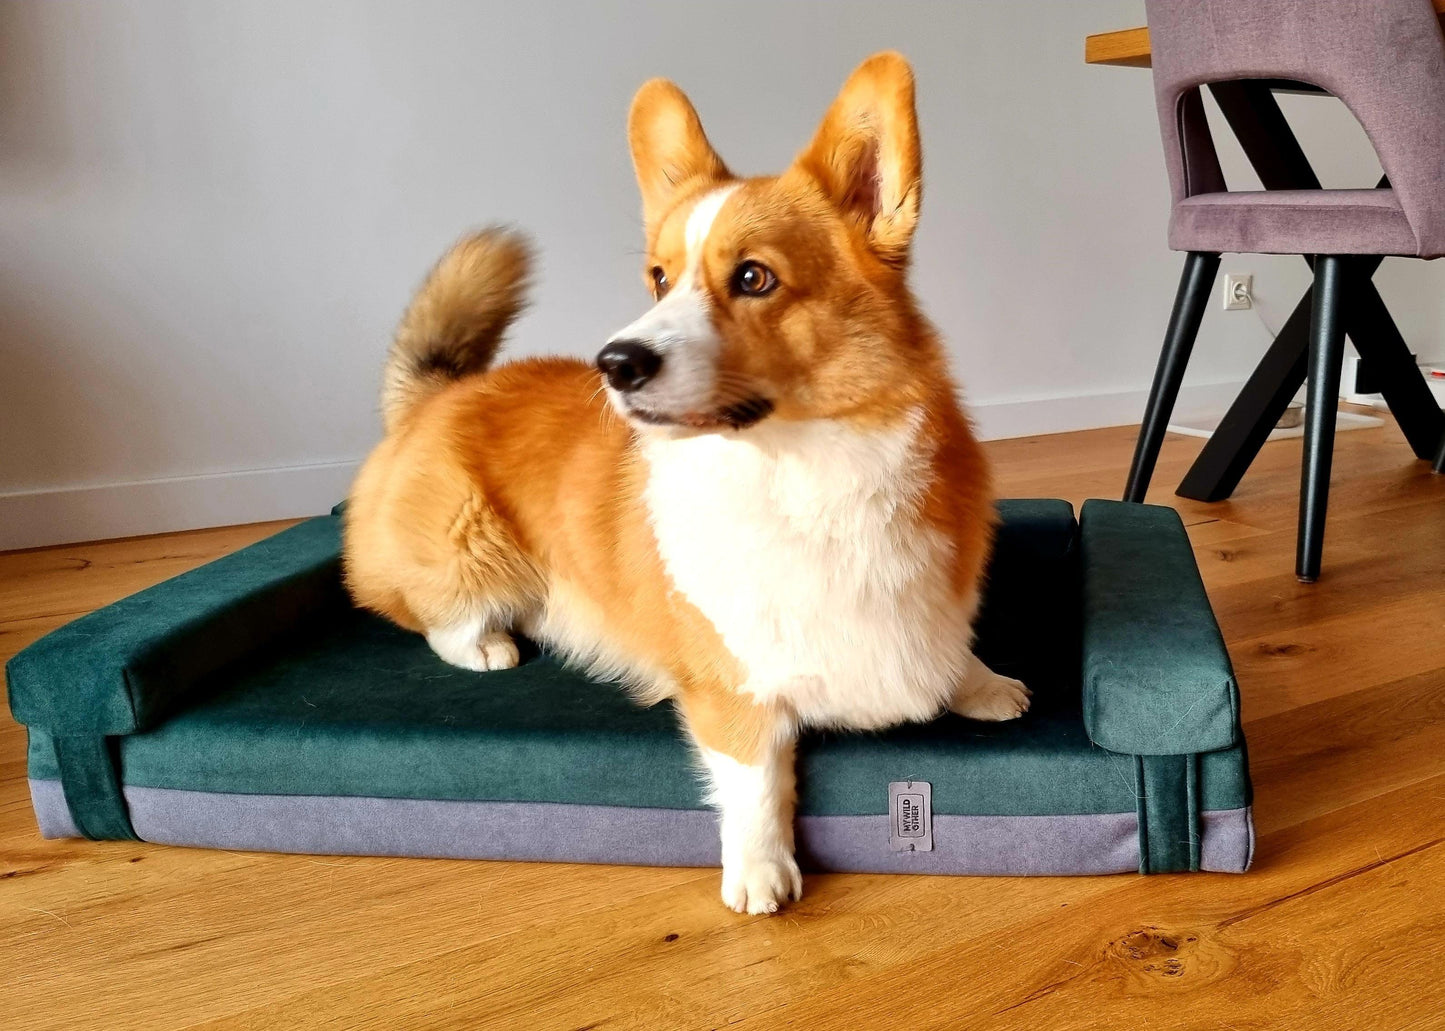 Transformer dog bed | Extra comfort & support | 2-sided | MOSS GREEN+STEEL GREY - premium dog goods handmade in Europe by animalistus